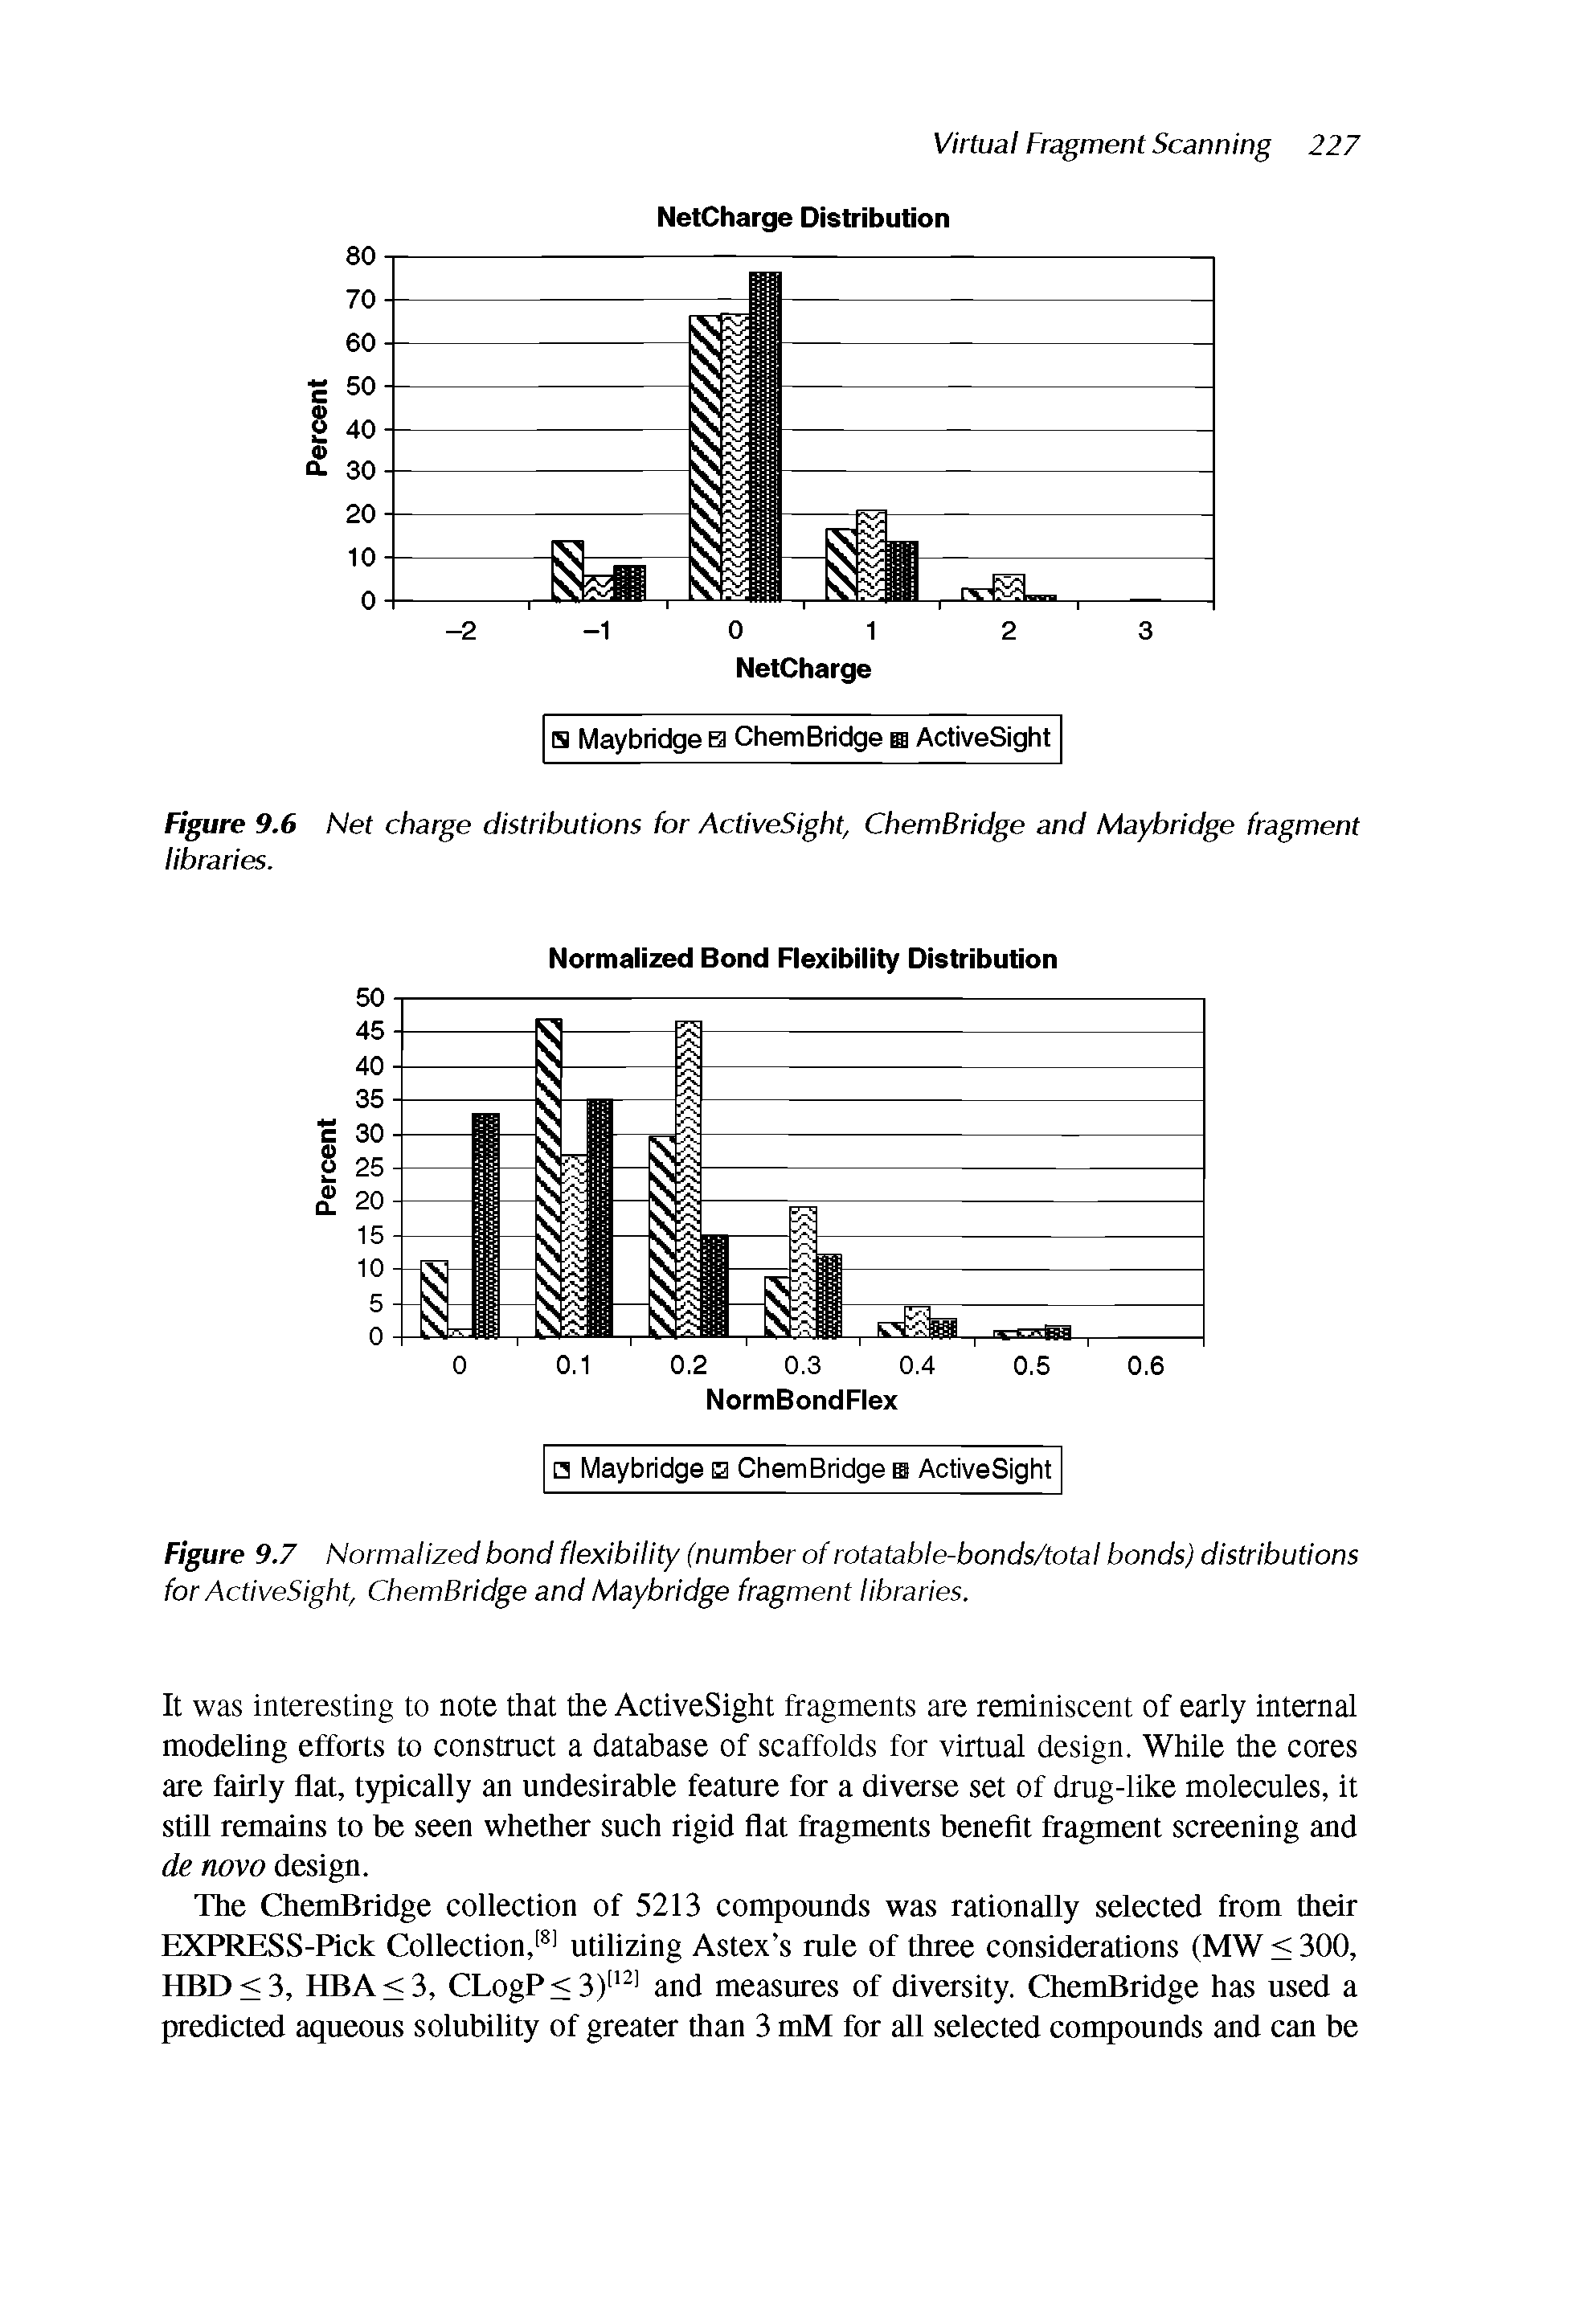 Figure 9.7 Normalized bond flexibility (number of rotatable-bonds/total bonds) distributions for ActiveSight, ChemBridge and Maybridge fragment libraries.